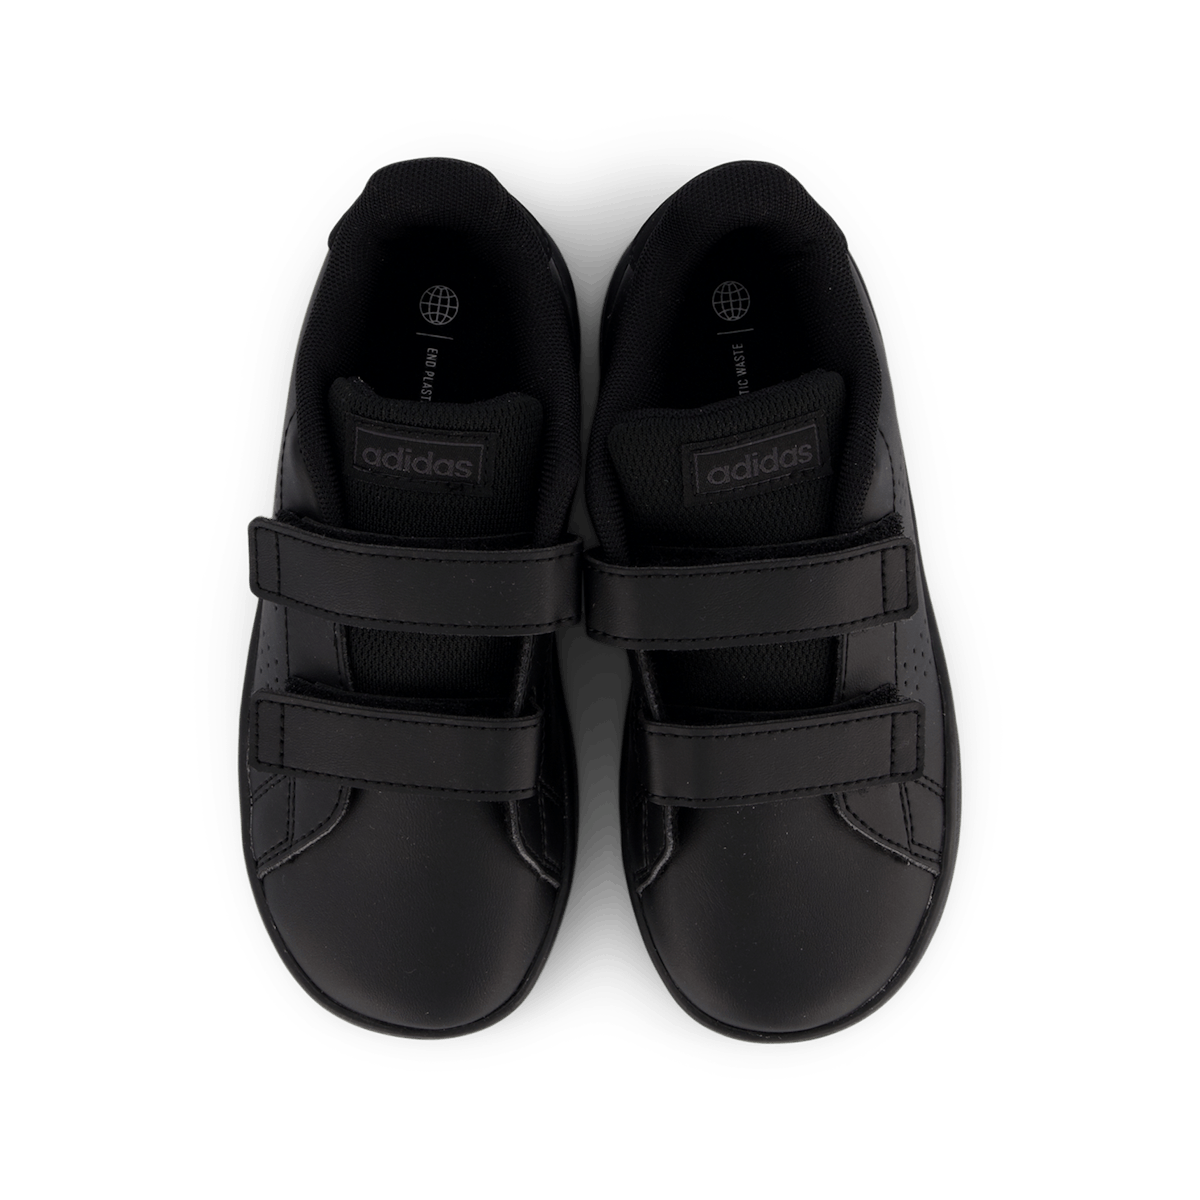 Advantage Lifestyle Court Two Hook-and-Loop Shoes Core Black / Core Black / Grey Six